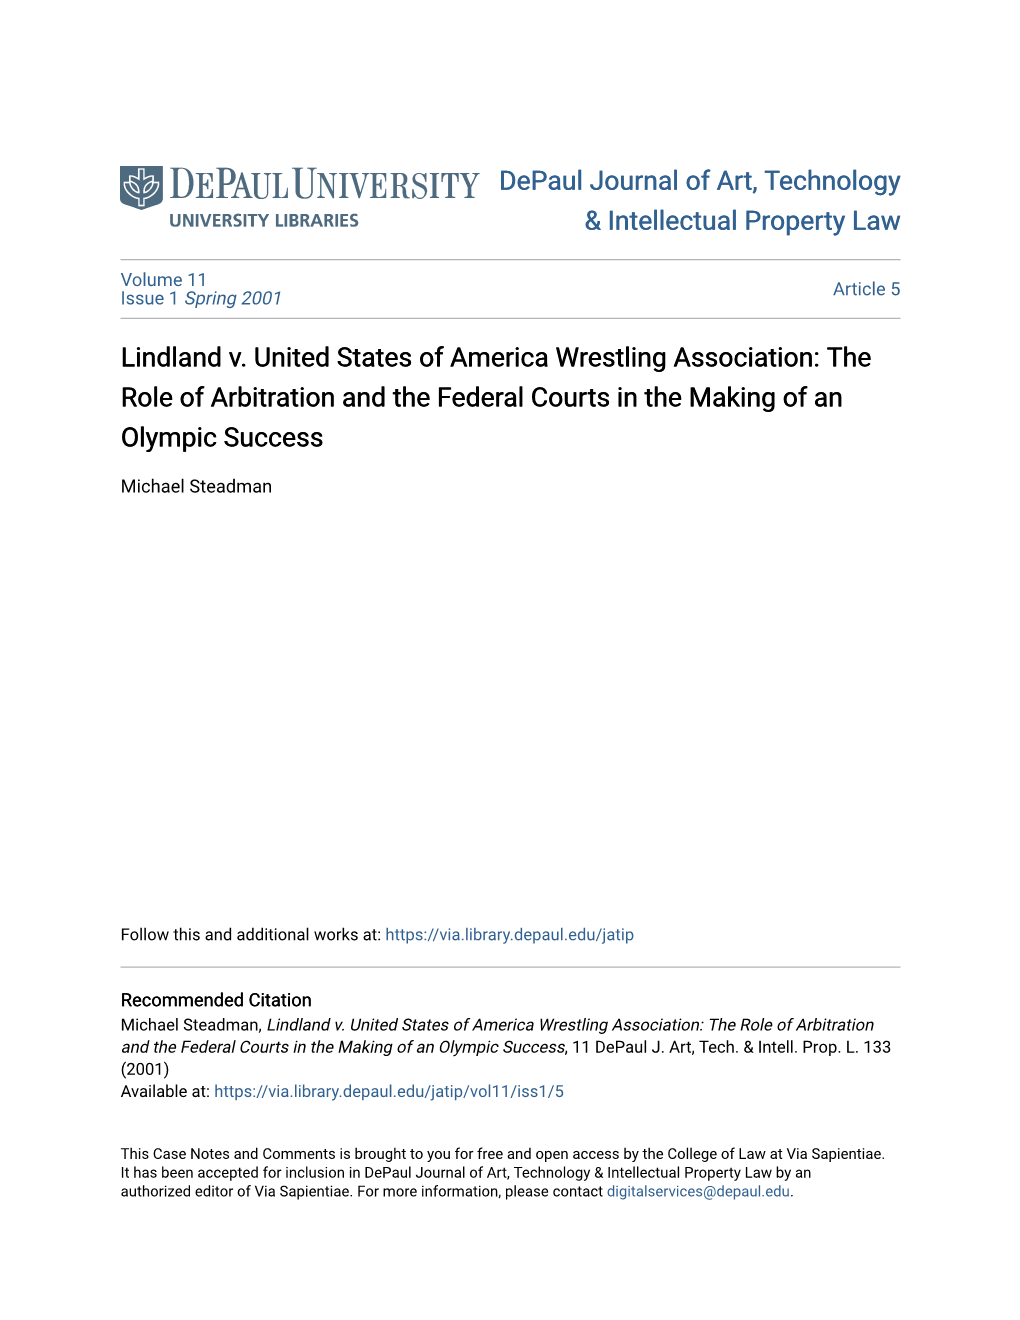 Lindland V. United States of America Wrestling Association: the Role of Arbitration and the Federal Courts in the Making of an Olympic Success